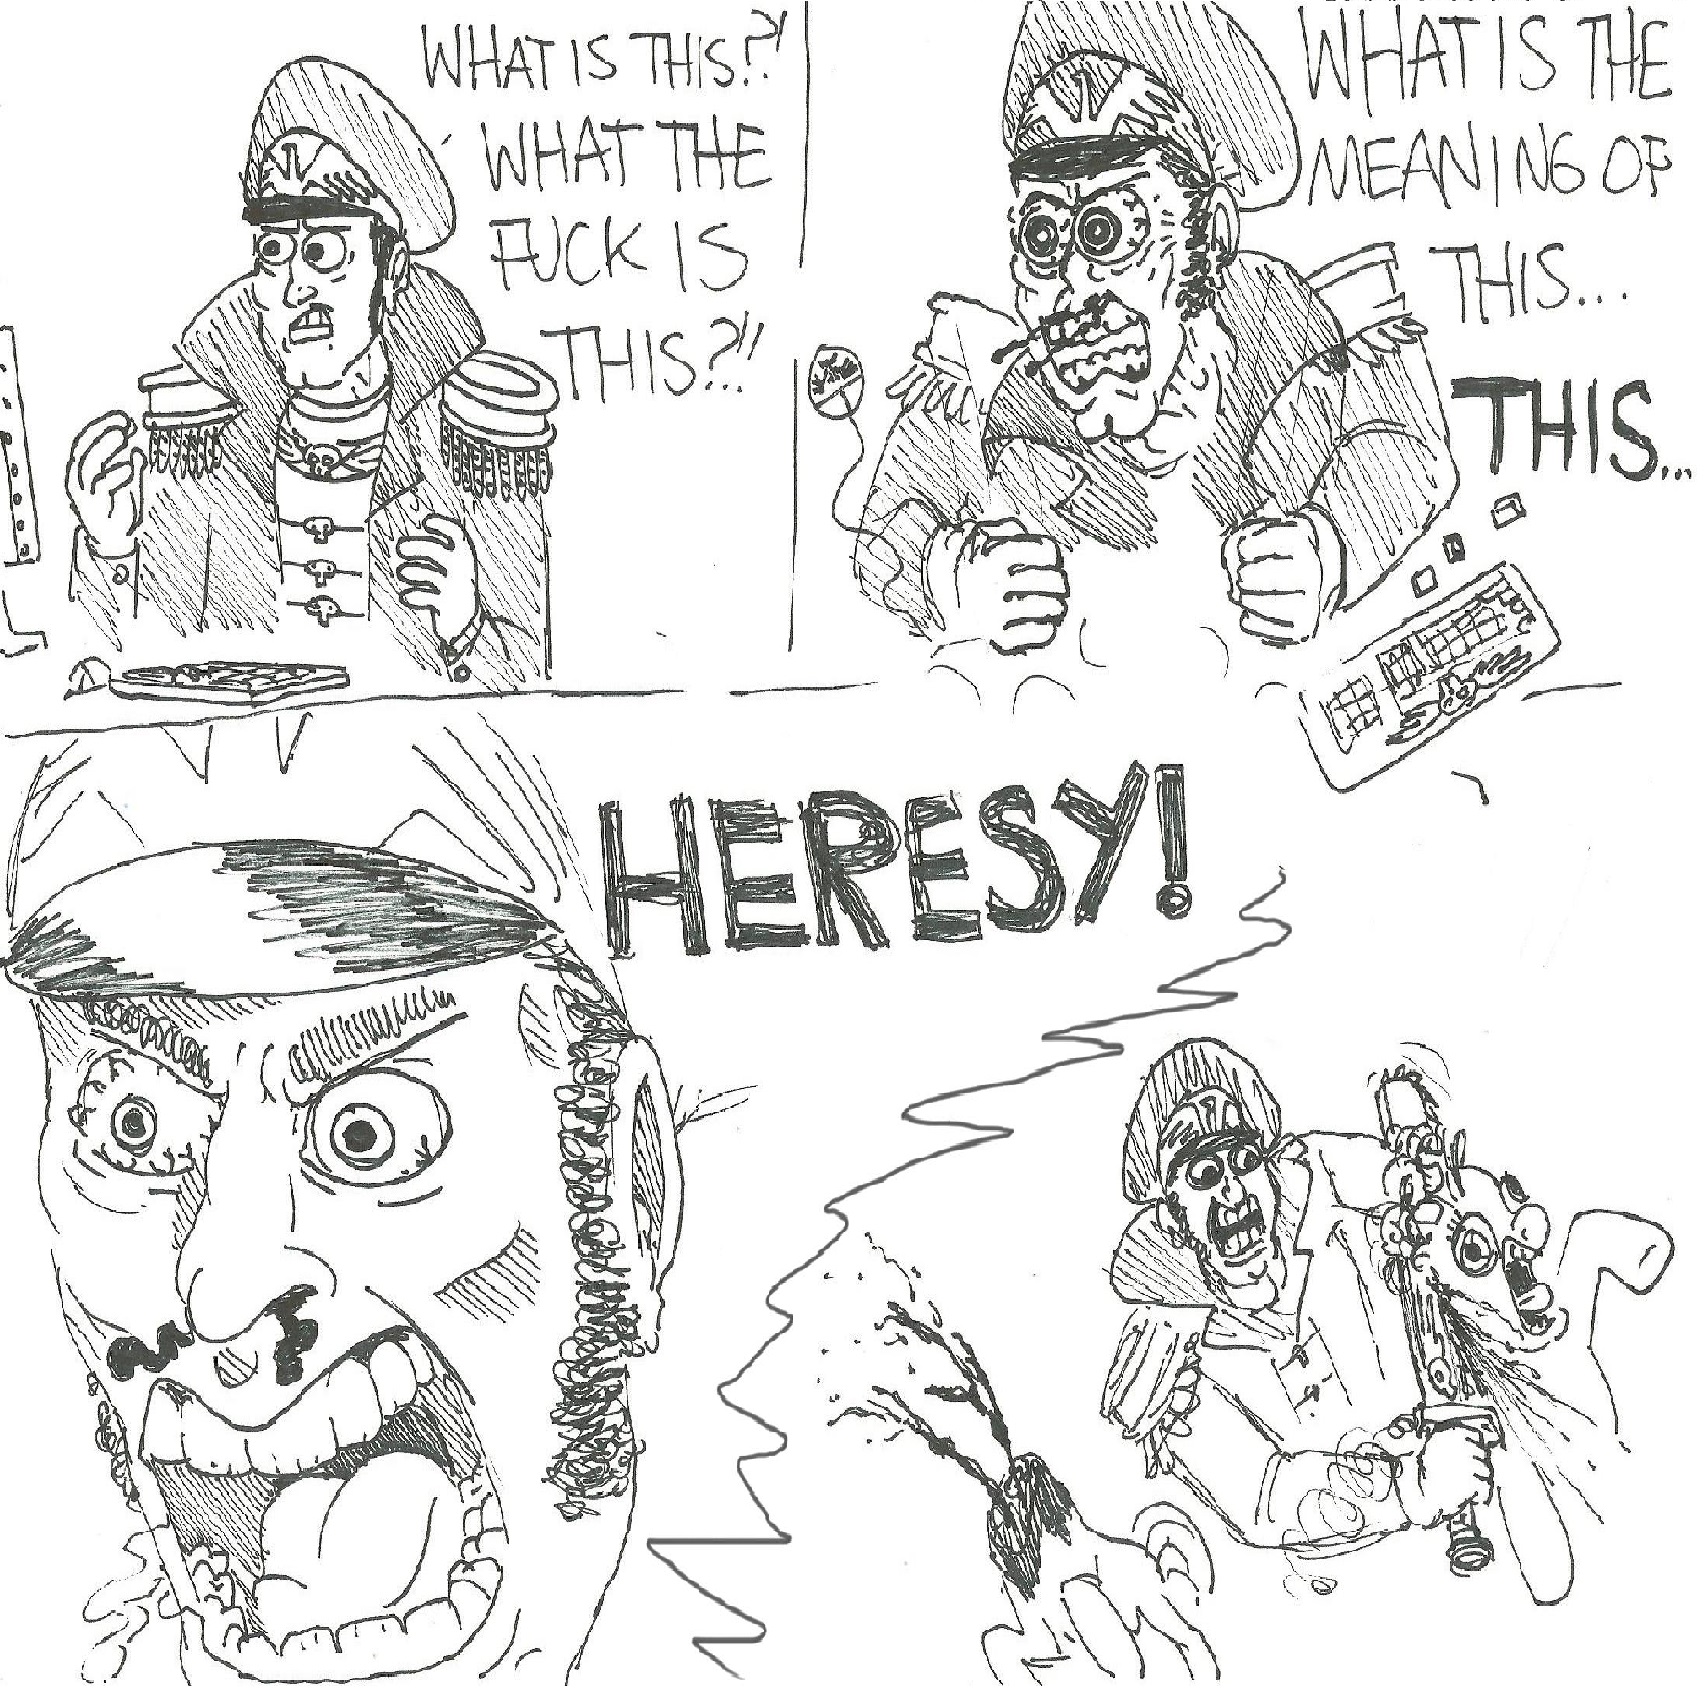 the only appropriate reaction to HERESY